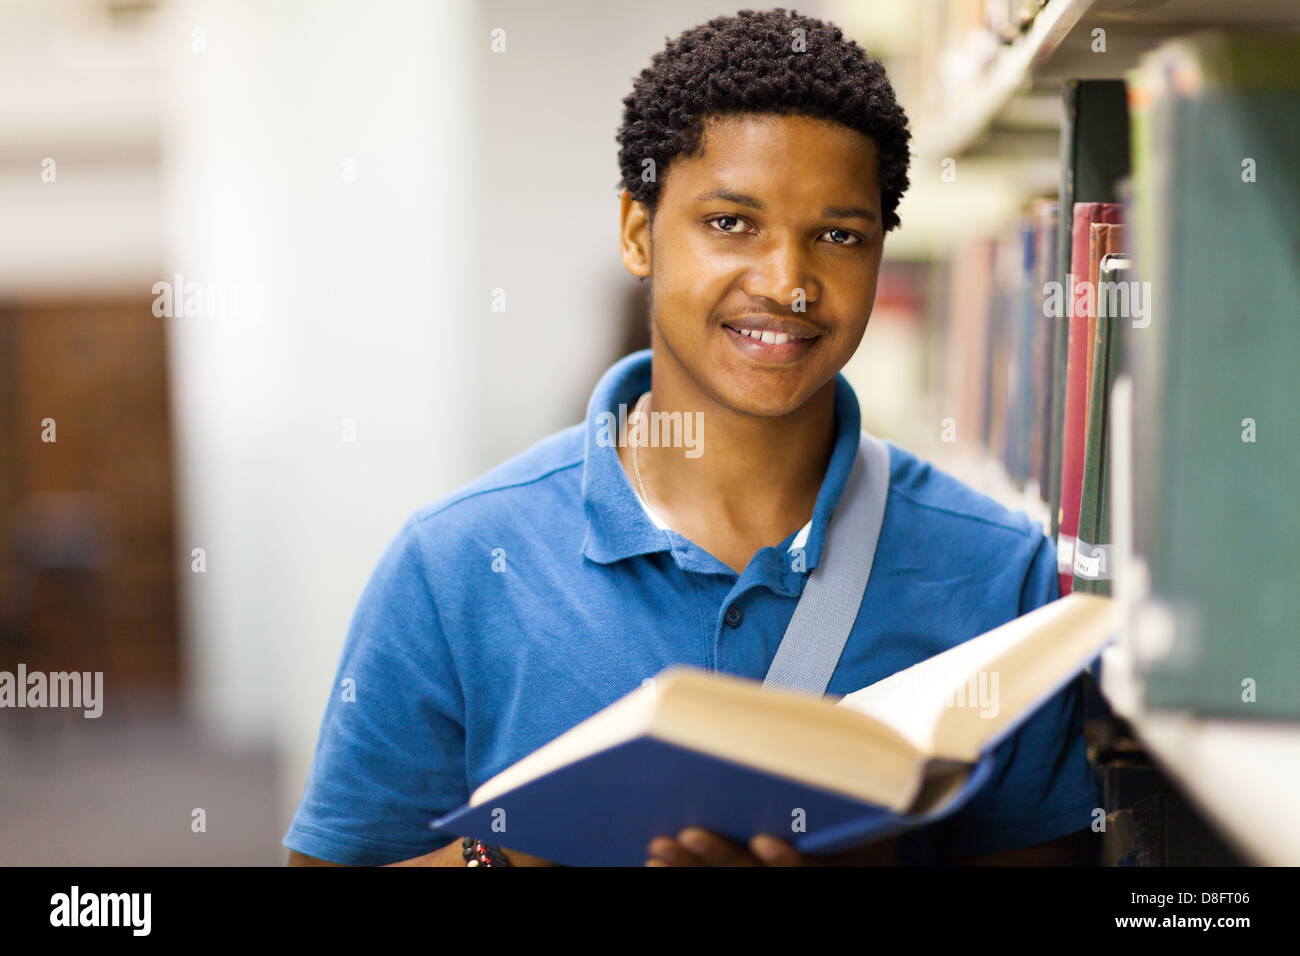 male African American college student reading book in library Stock Photo